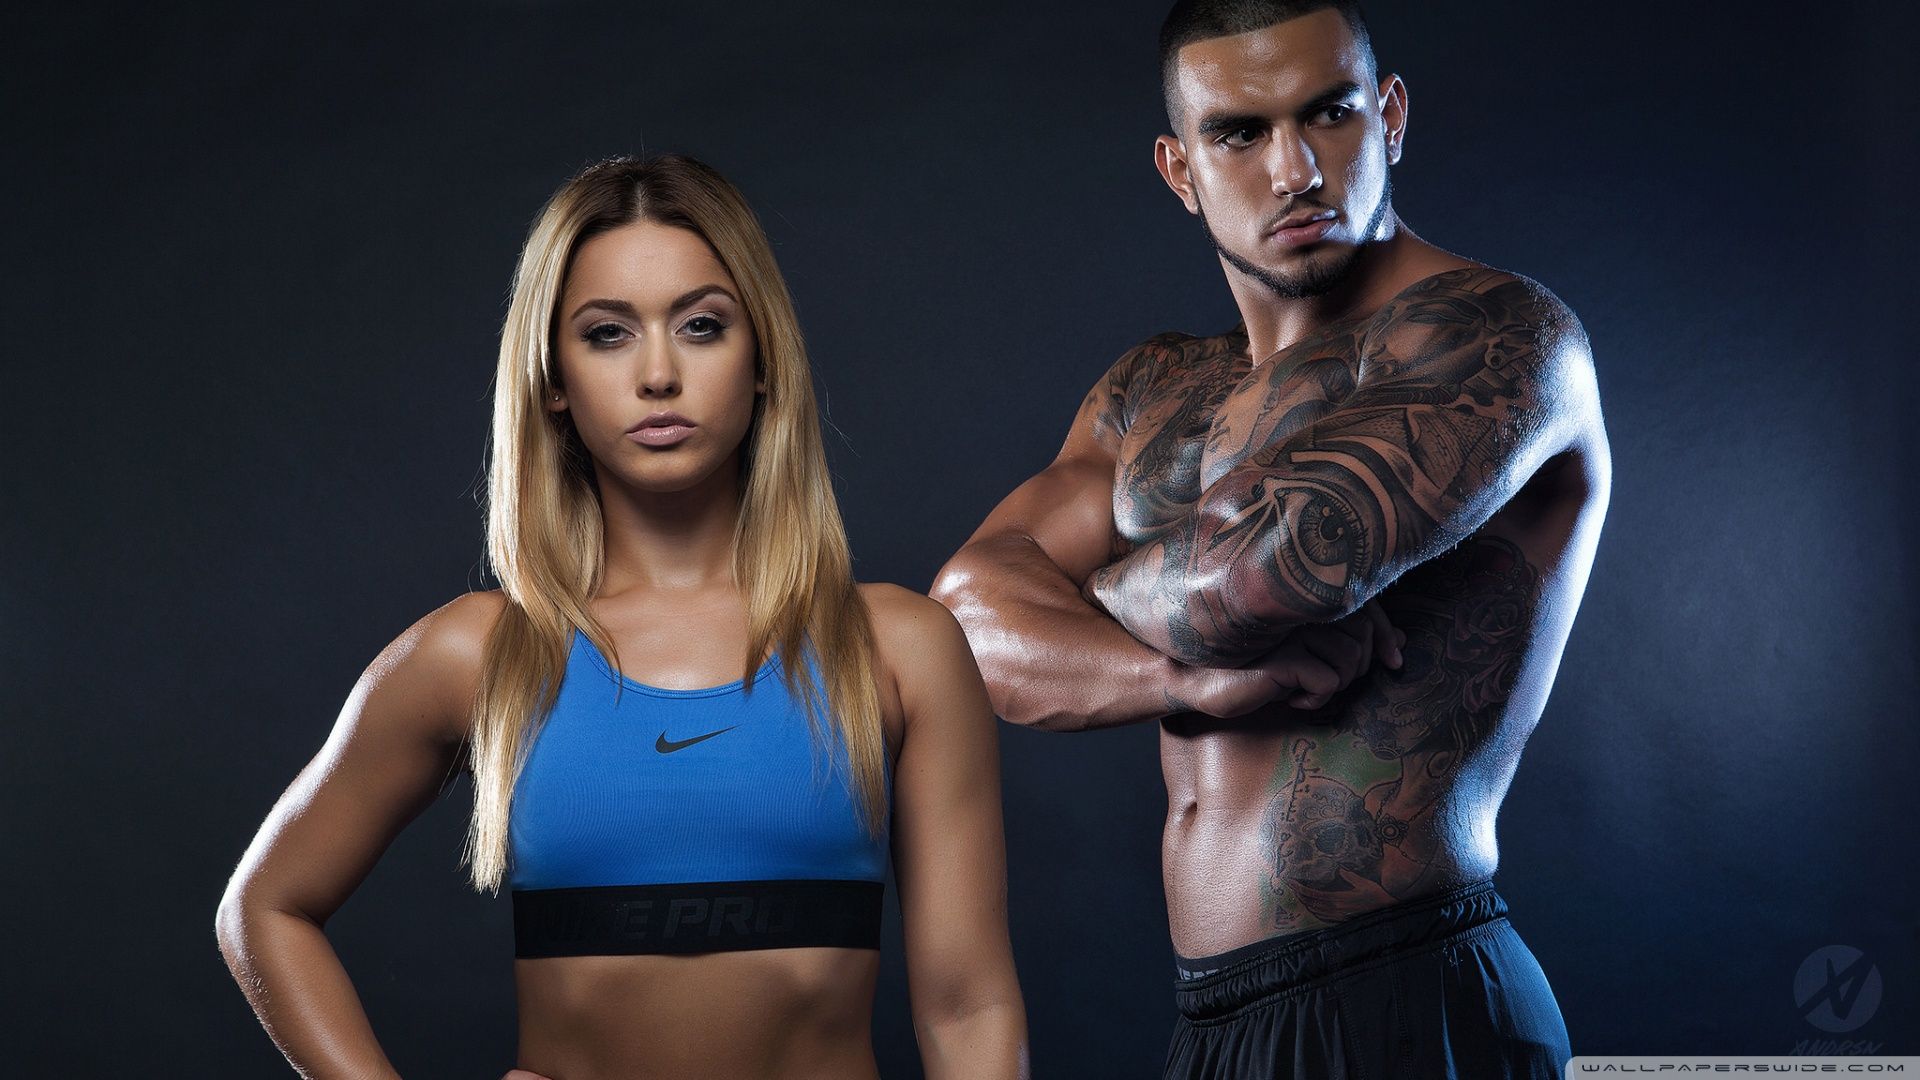 Fitness Man And Woman Wallpaper & Background Download